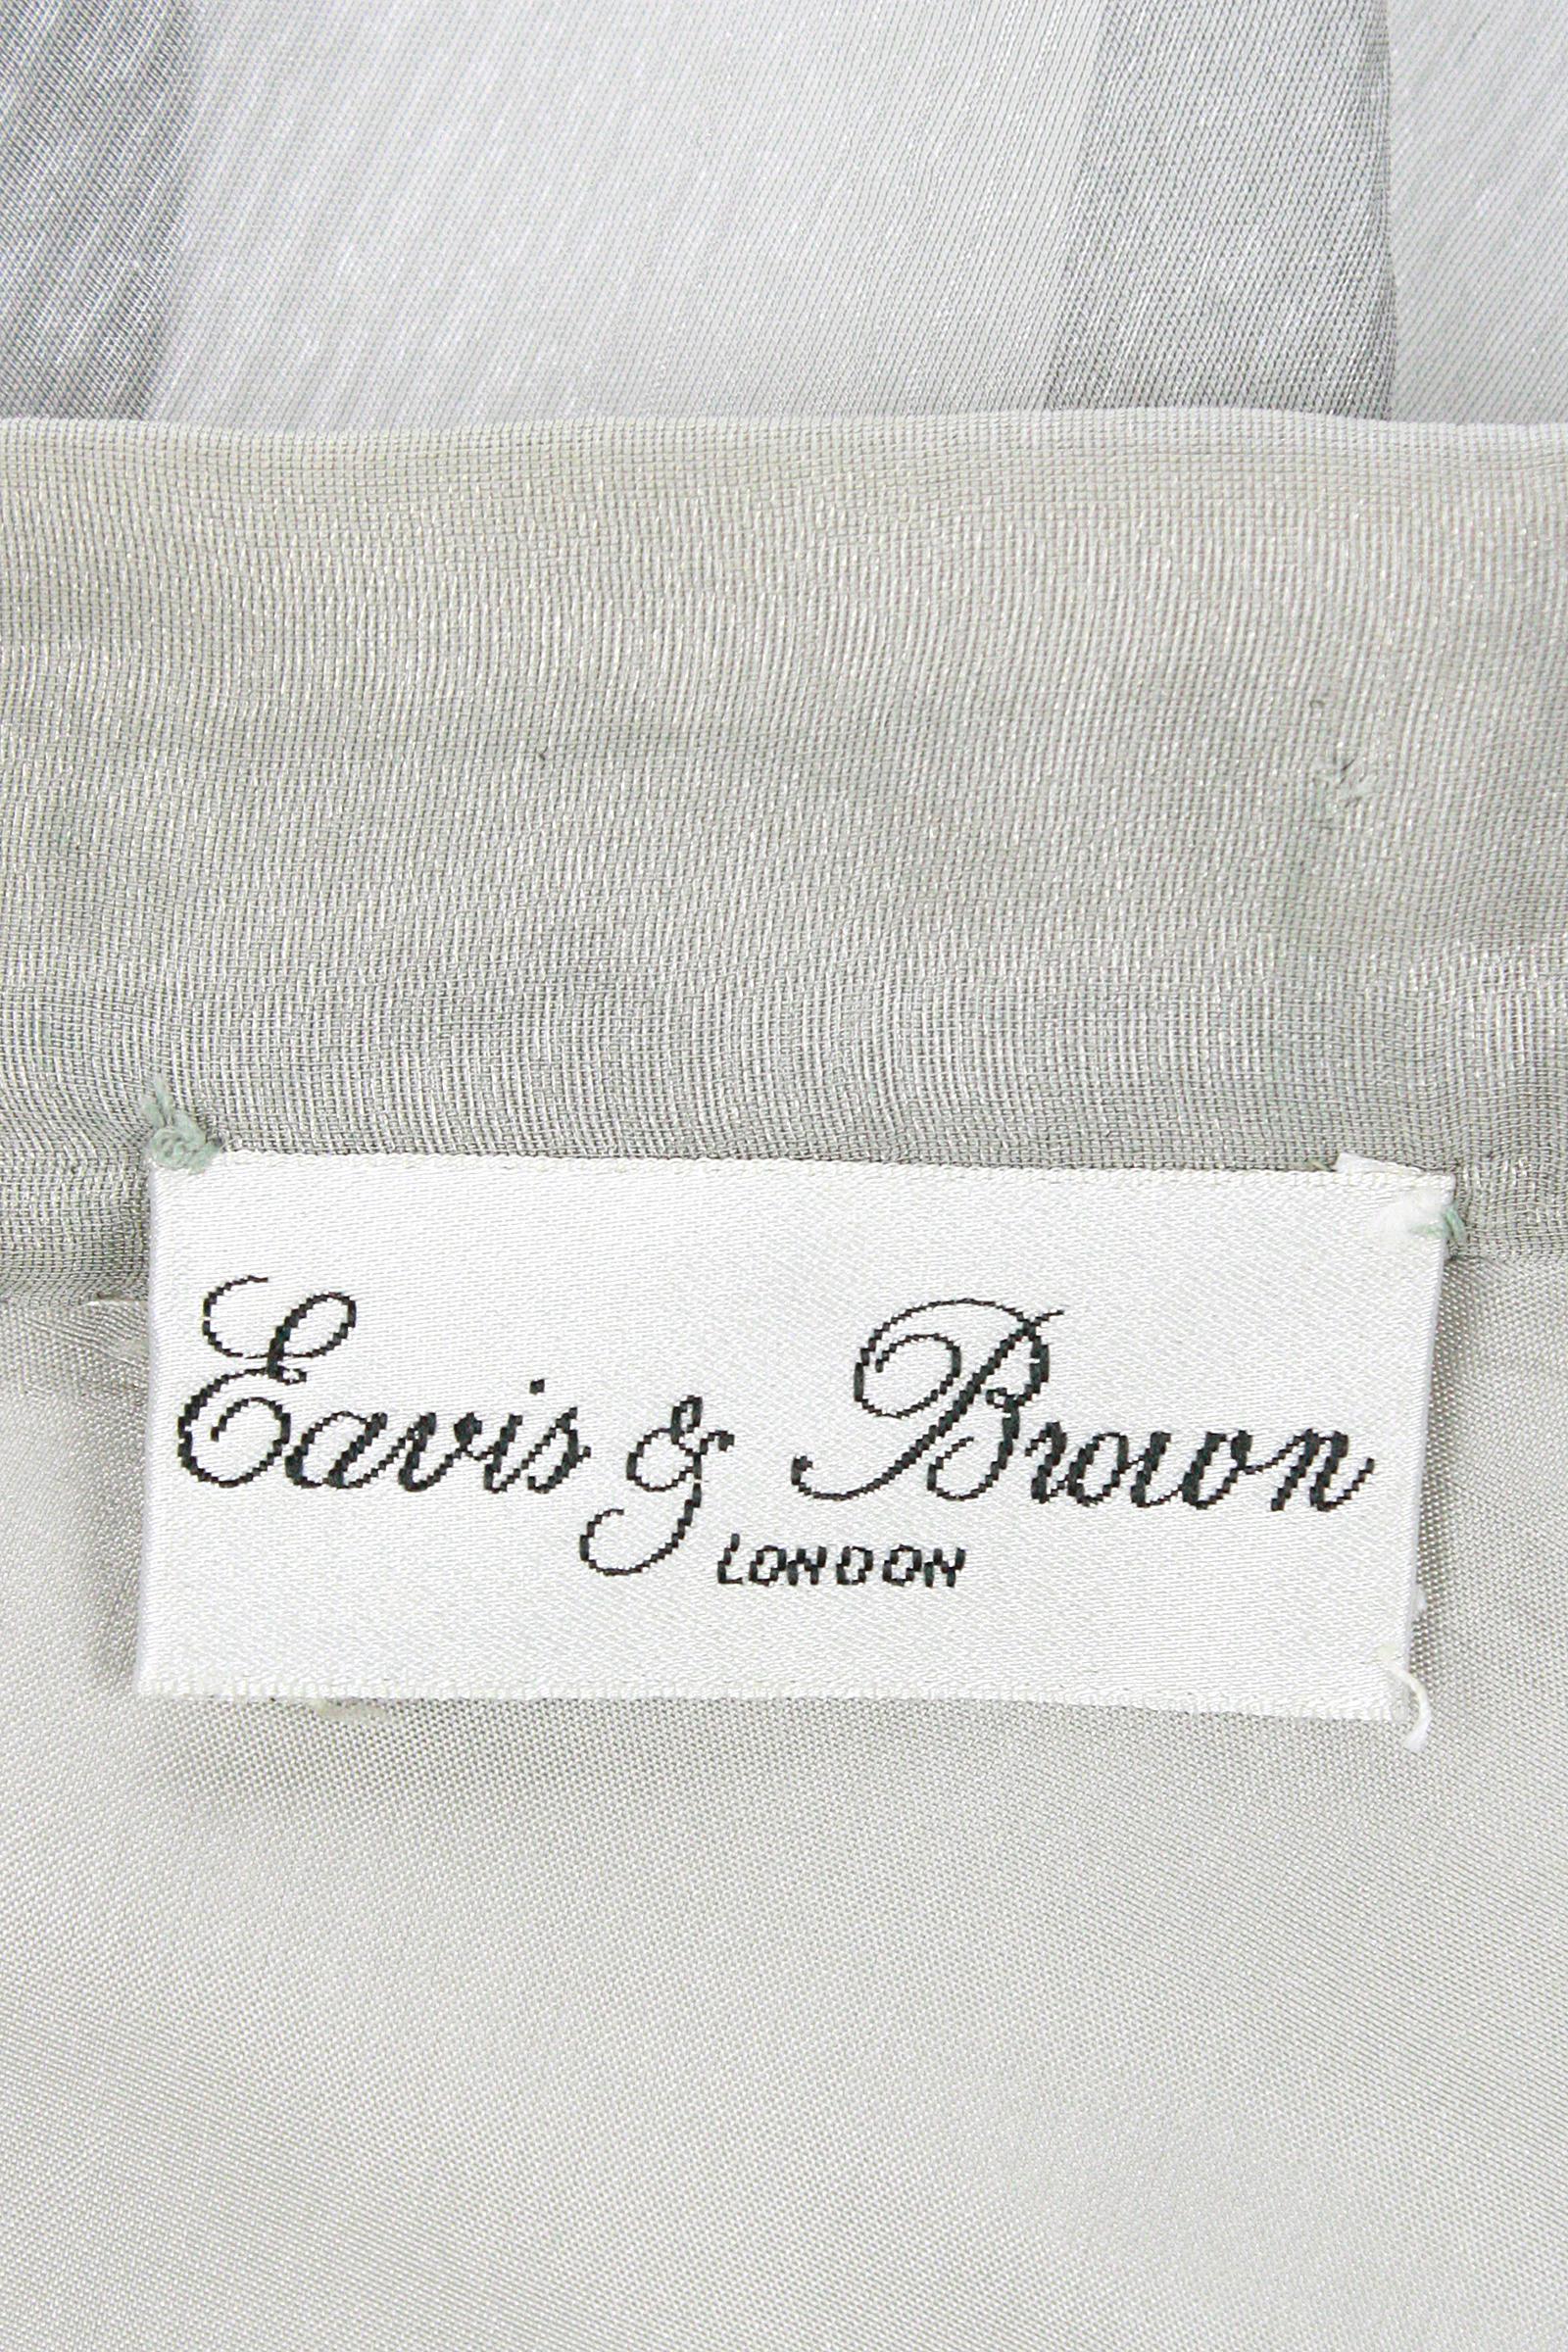 Eavis & Brown London Seafoam Chiffon Beaded Top and Long Silver Skirt  For Sale 5